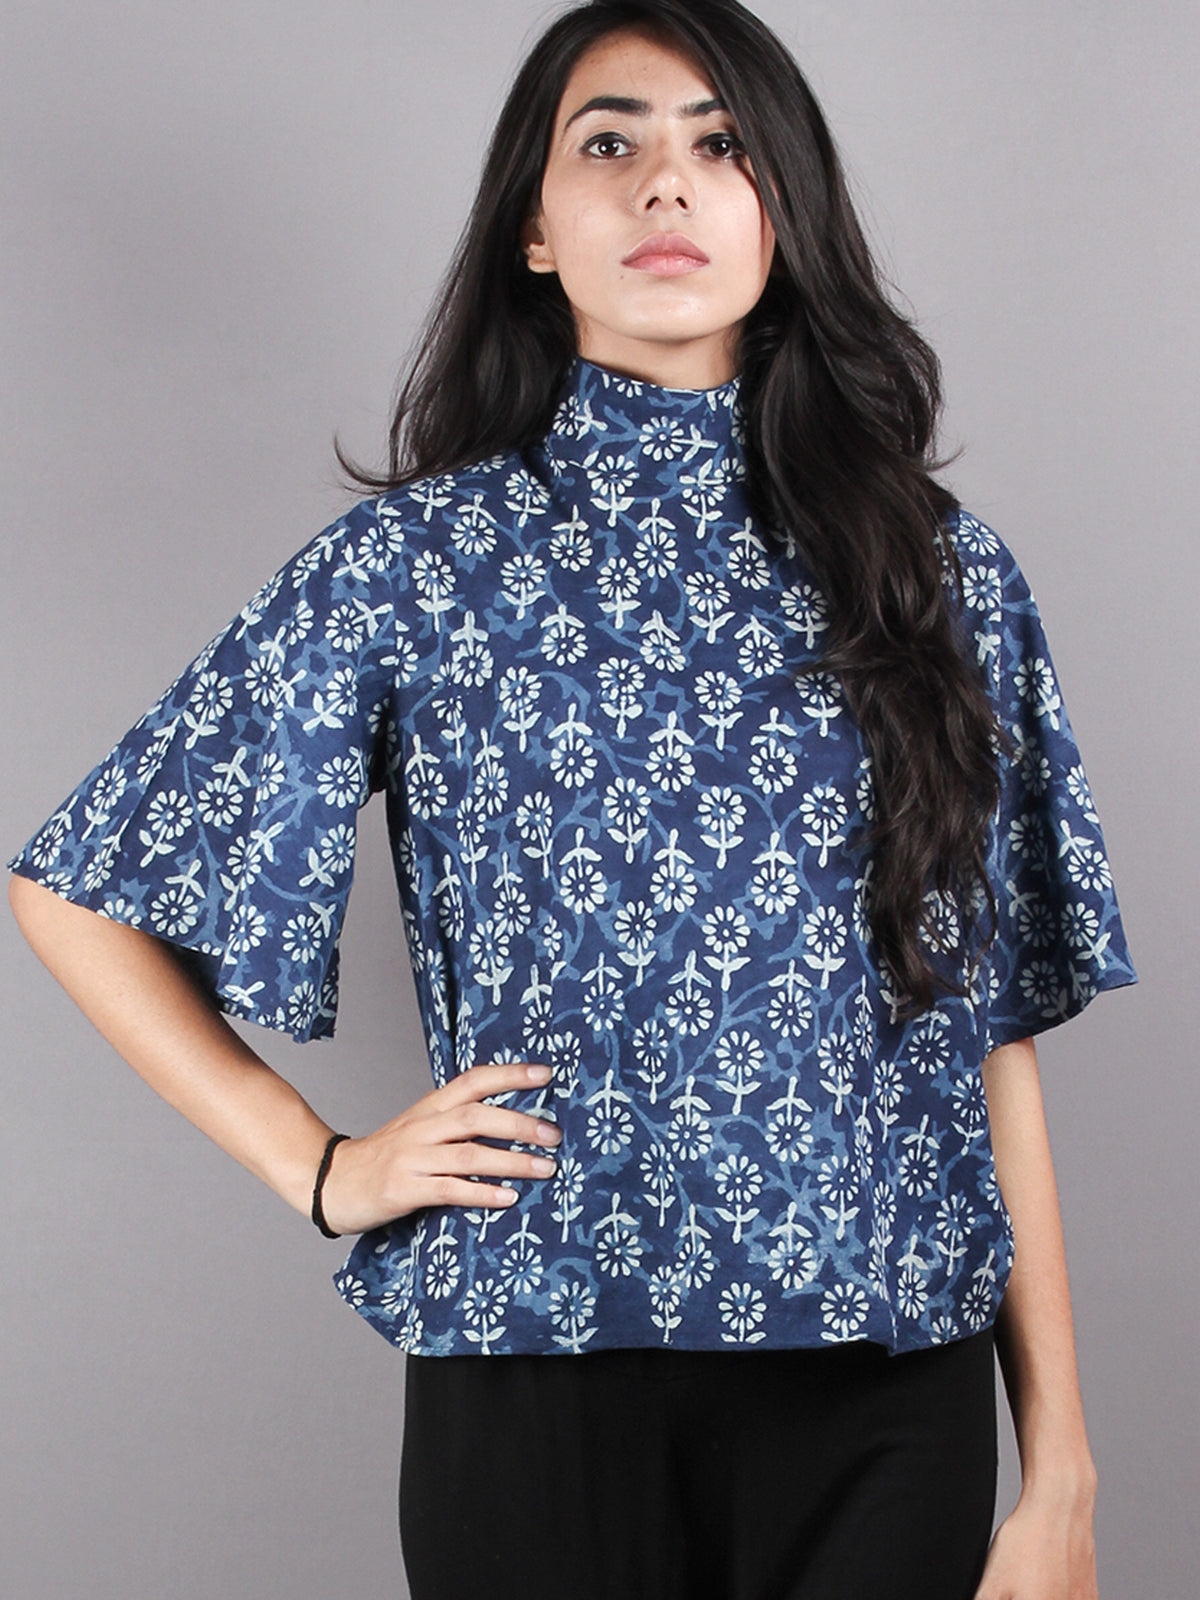 Indigo High Neck Hand Block Printed Cotton Flared Sleeves Back Buttons Top - T1004006